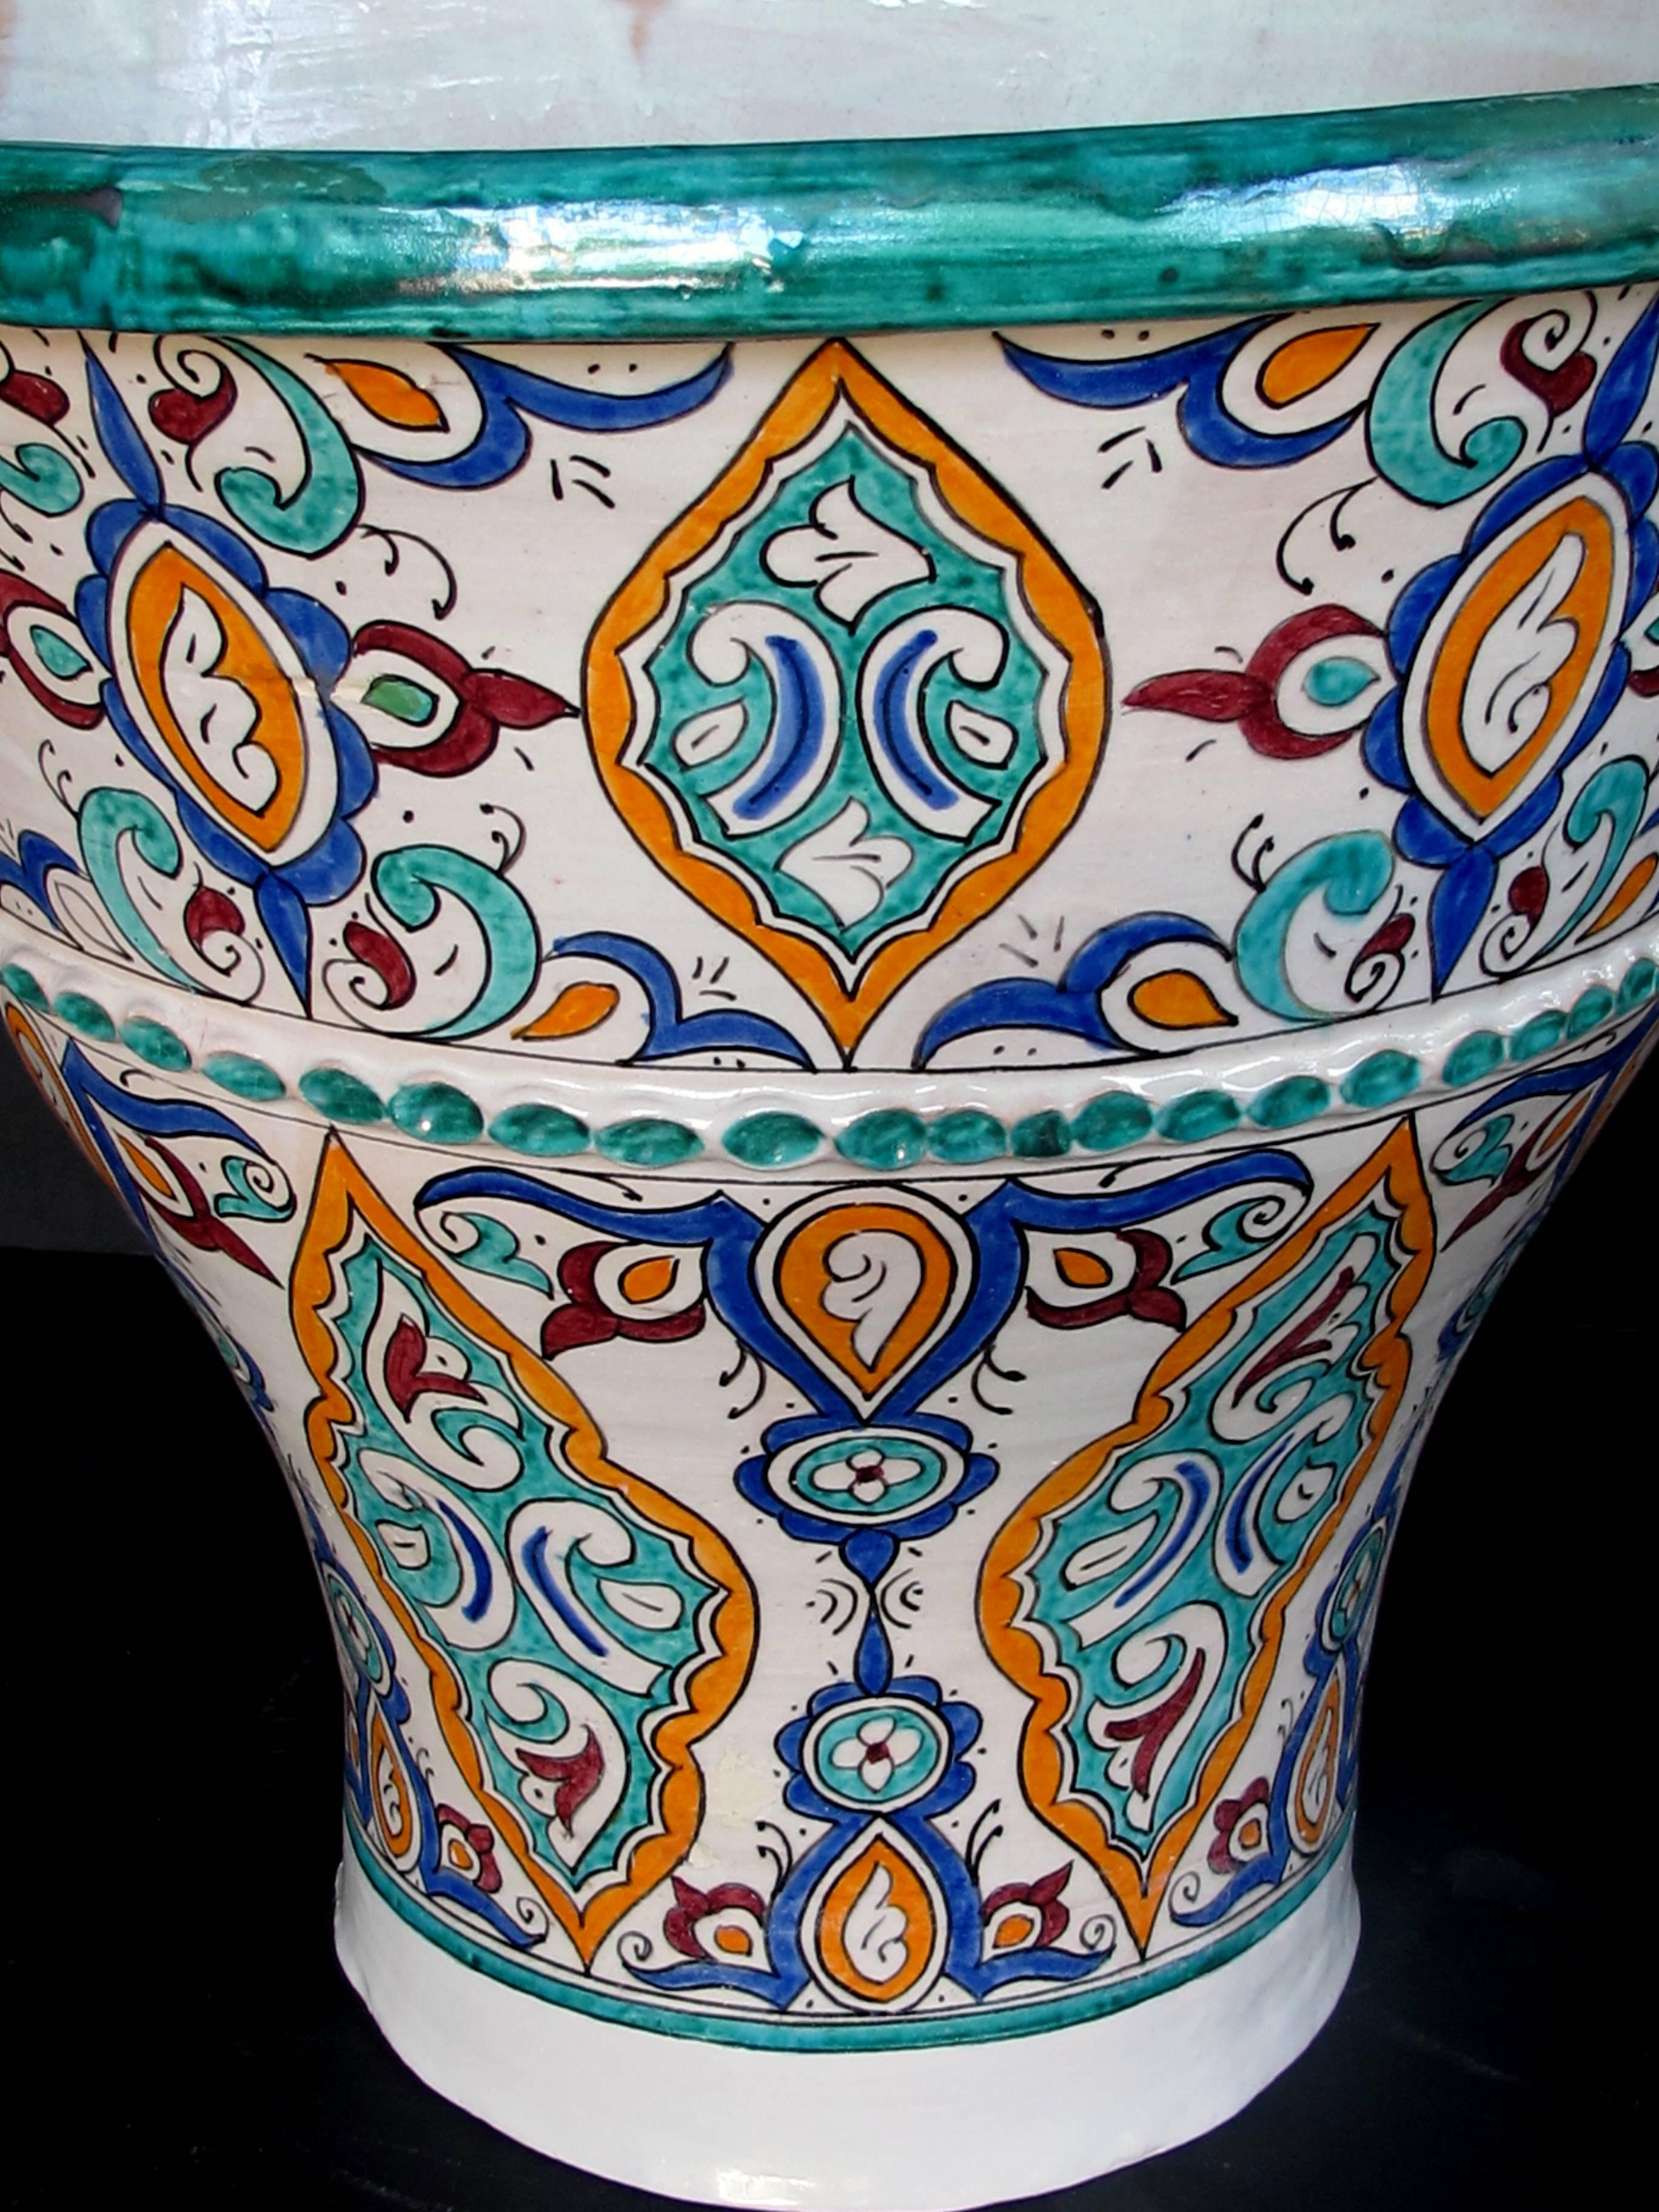 A large and vibrantly-glazed pair of Moroccan conical-form double-handled pots; purchased in Fez, Morocco; from the collection of a notable Napa interior designer for his hacienda in La Penita de Jaltemba, Mexico.